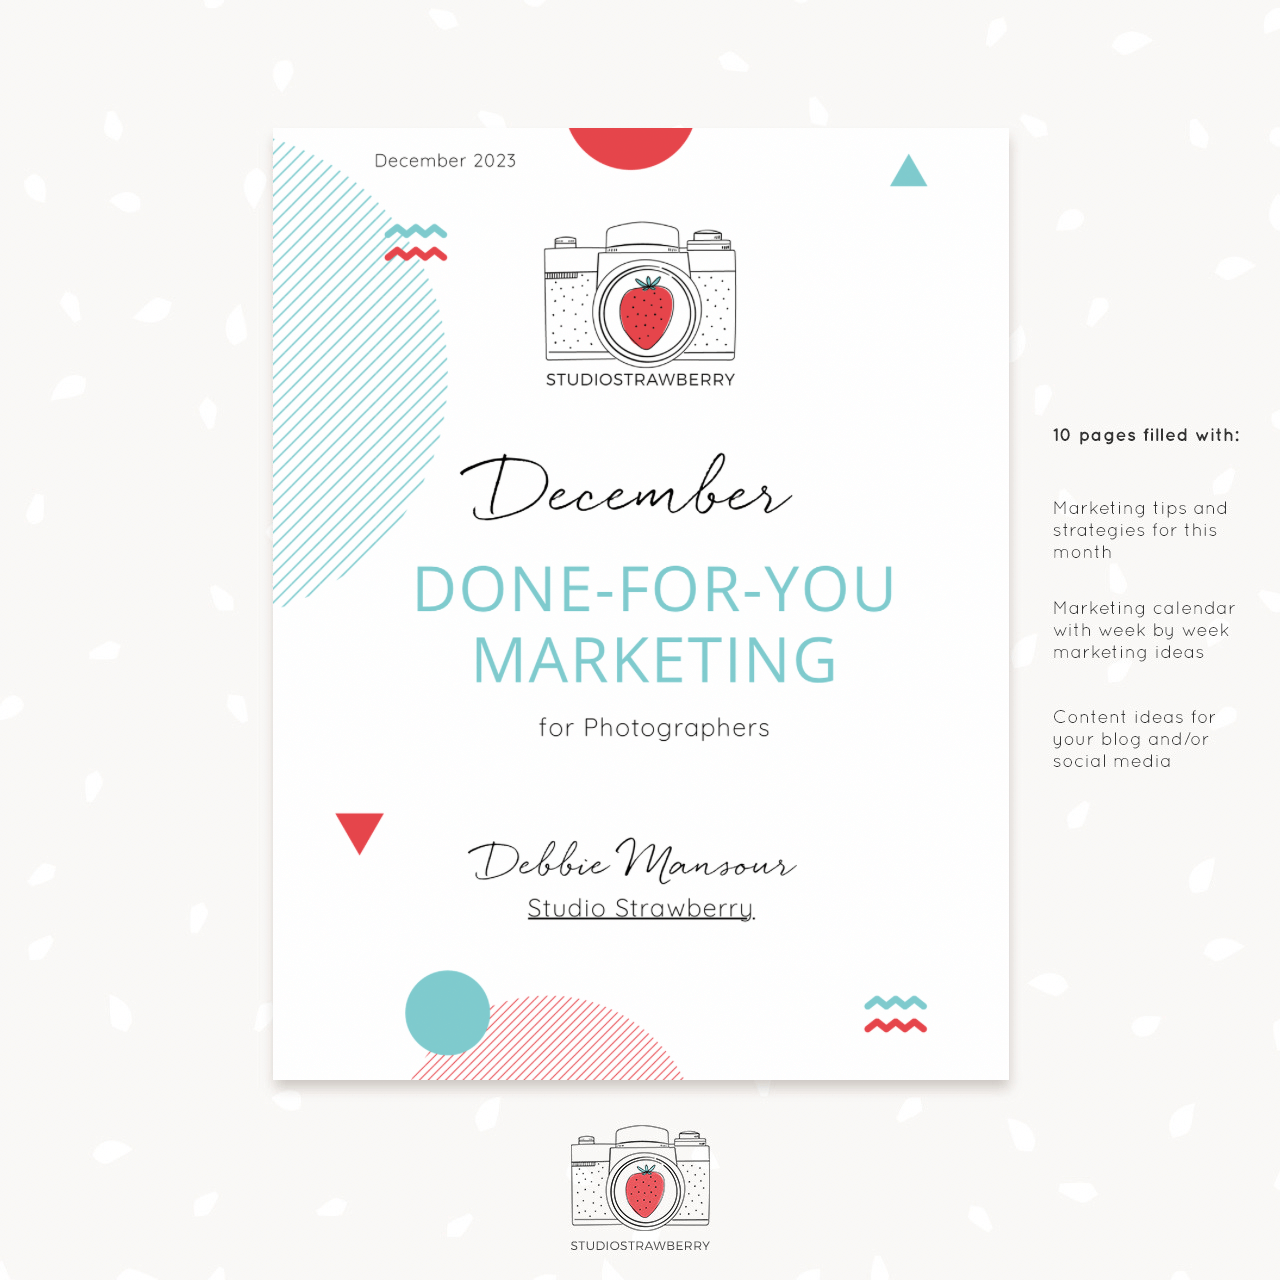 Done-For-You Marketing, December edition